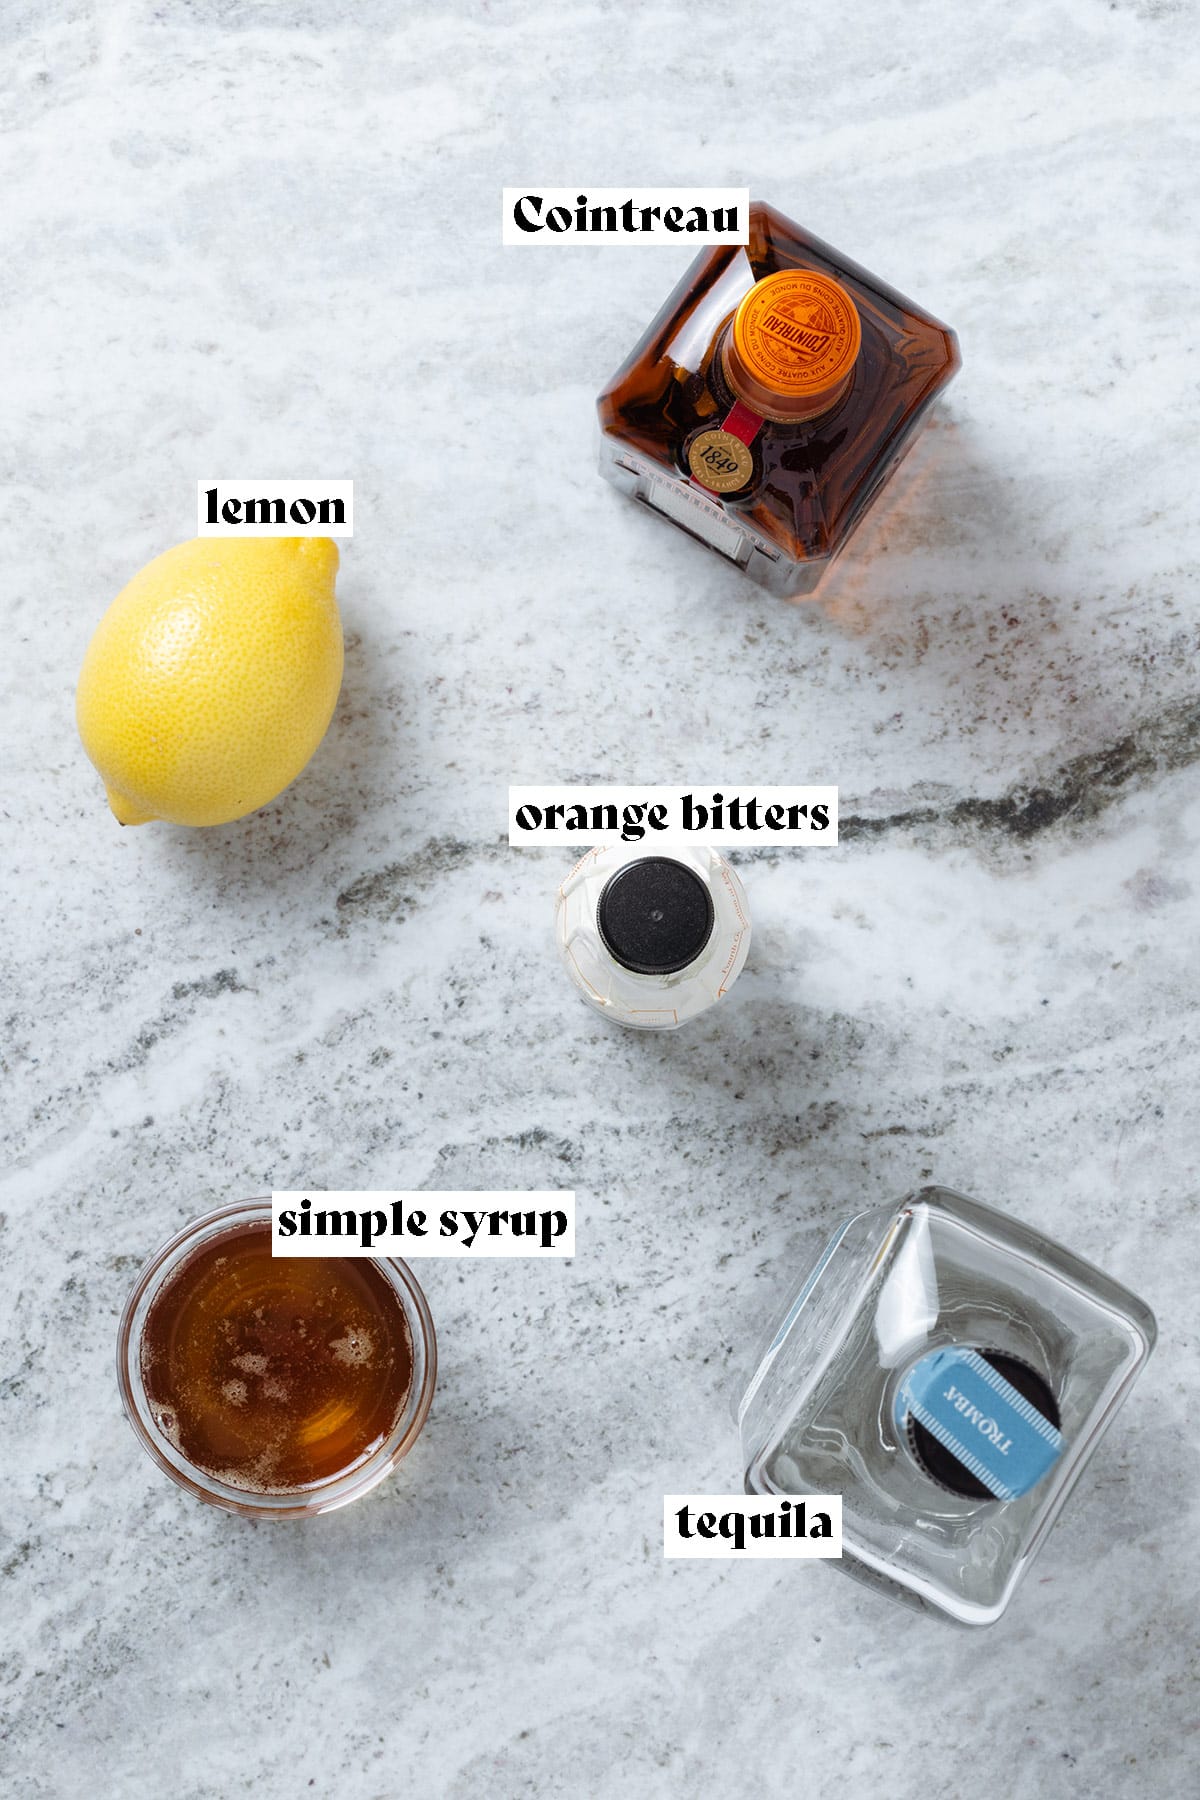 Cointreau, tequila, lemon, orange bitters, and simple syrup laid out on a stone background.